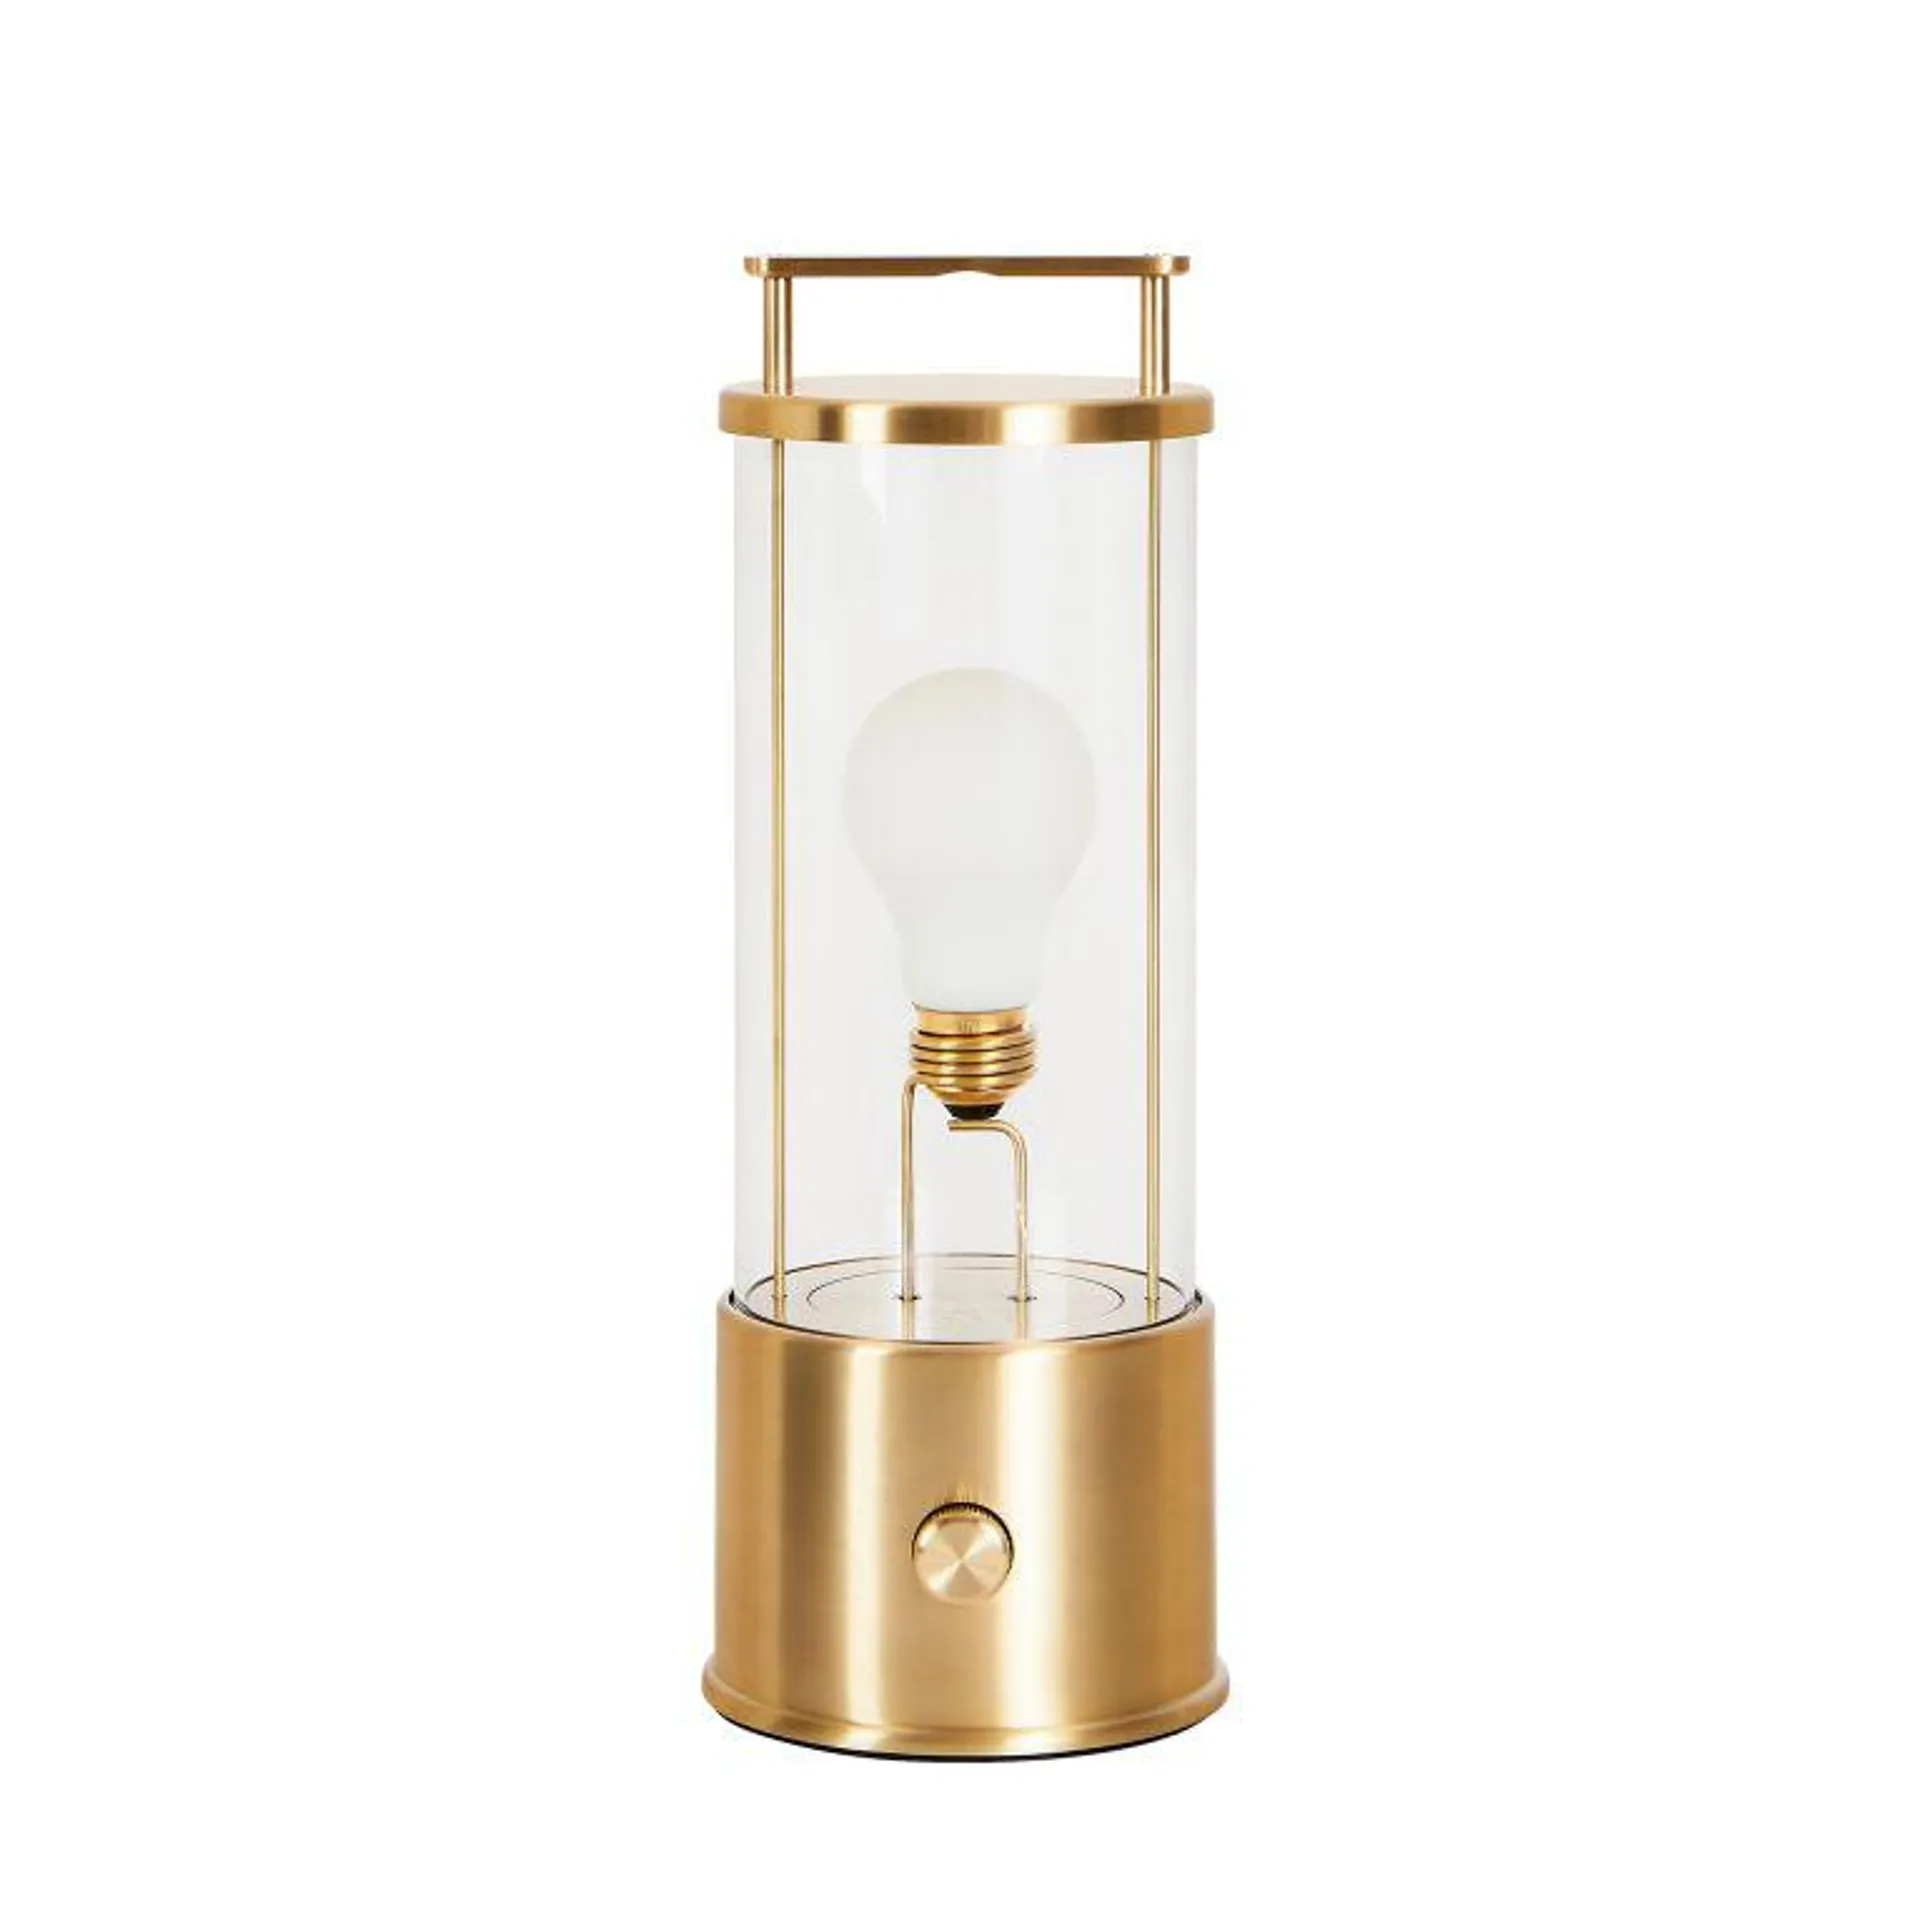 The Muse Portable Lamp in Solid Brass